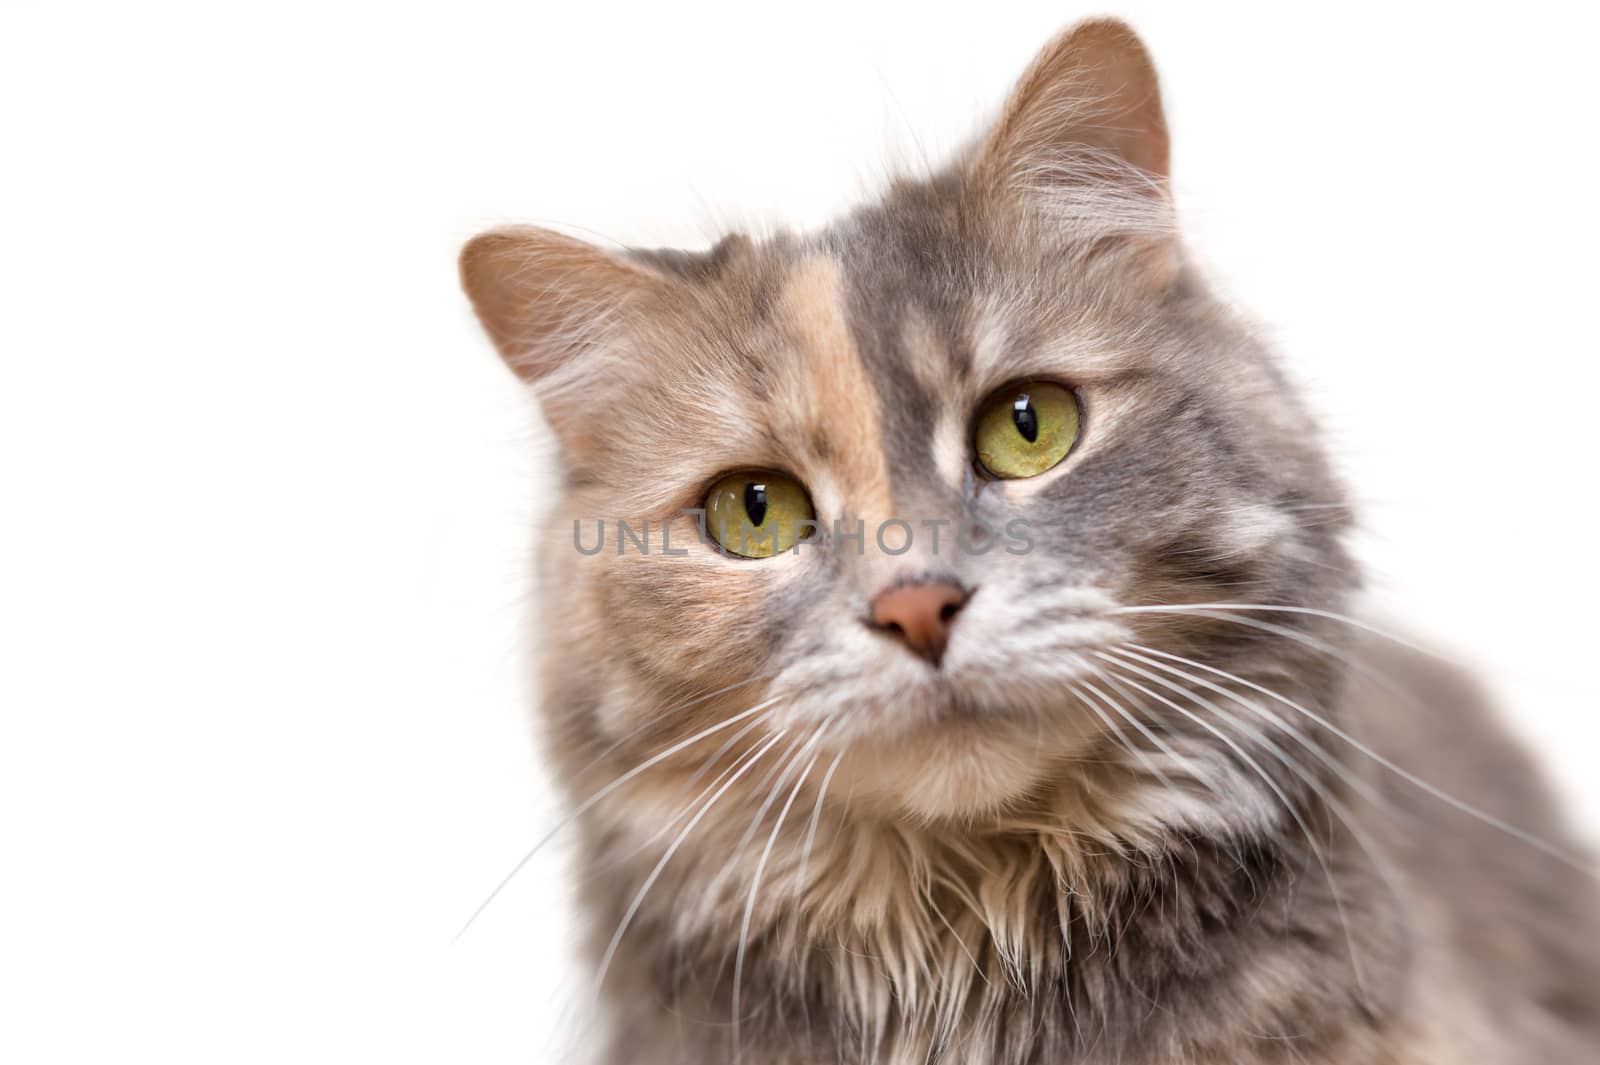 Portrait of a calico cat looking at the camera